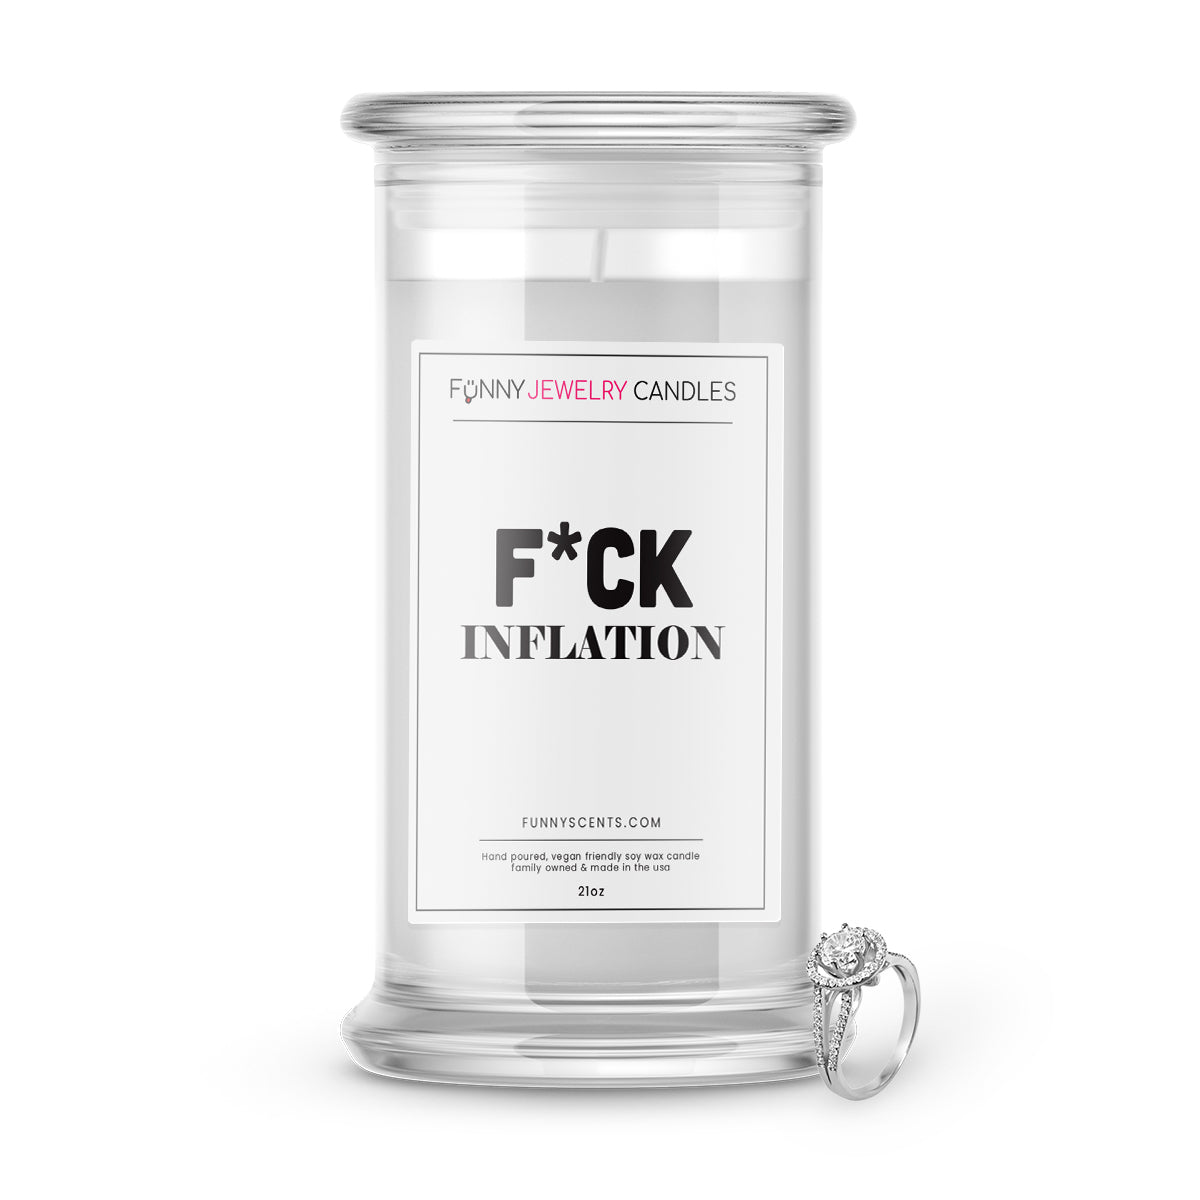 F*ck Inflation Jewelry Funny Candles